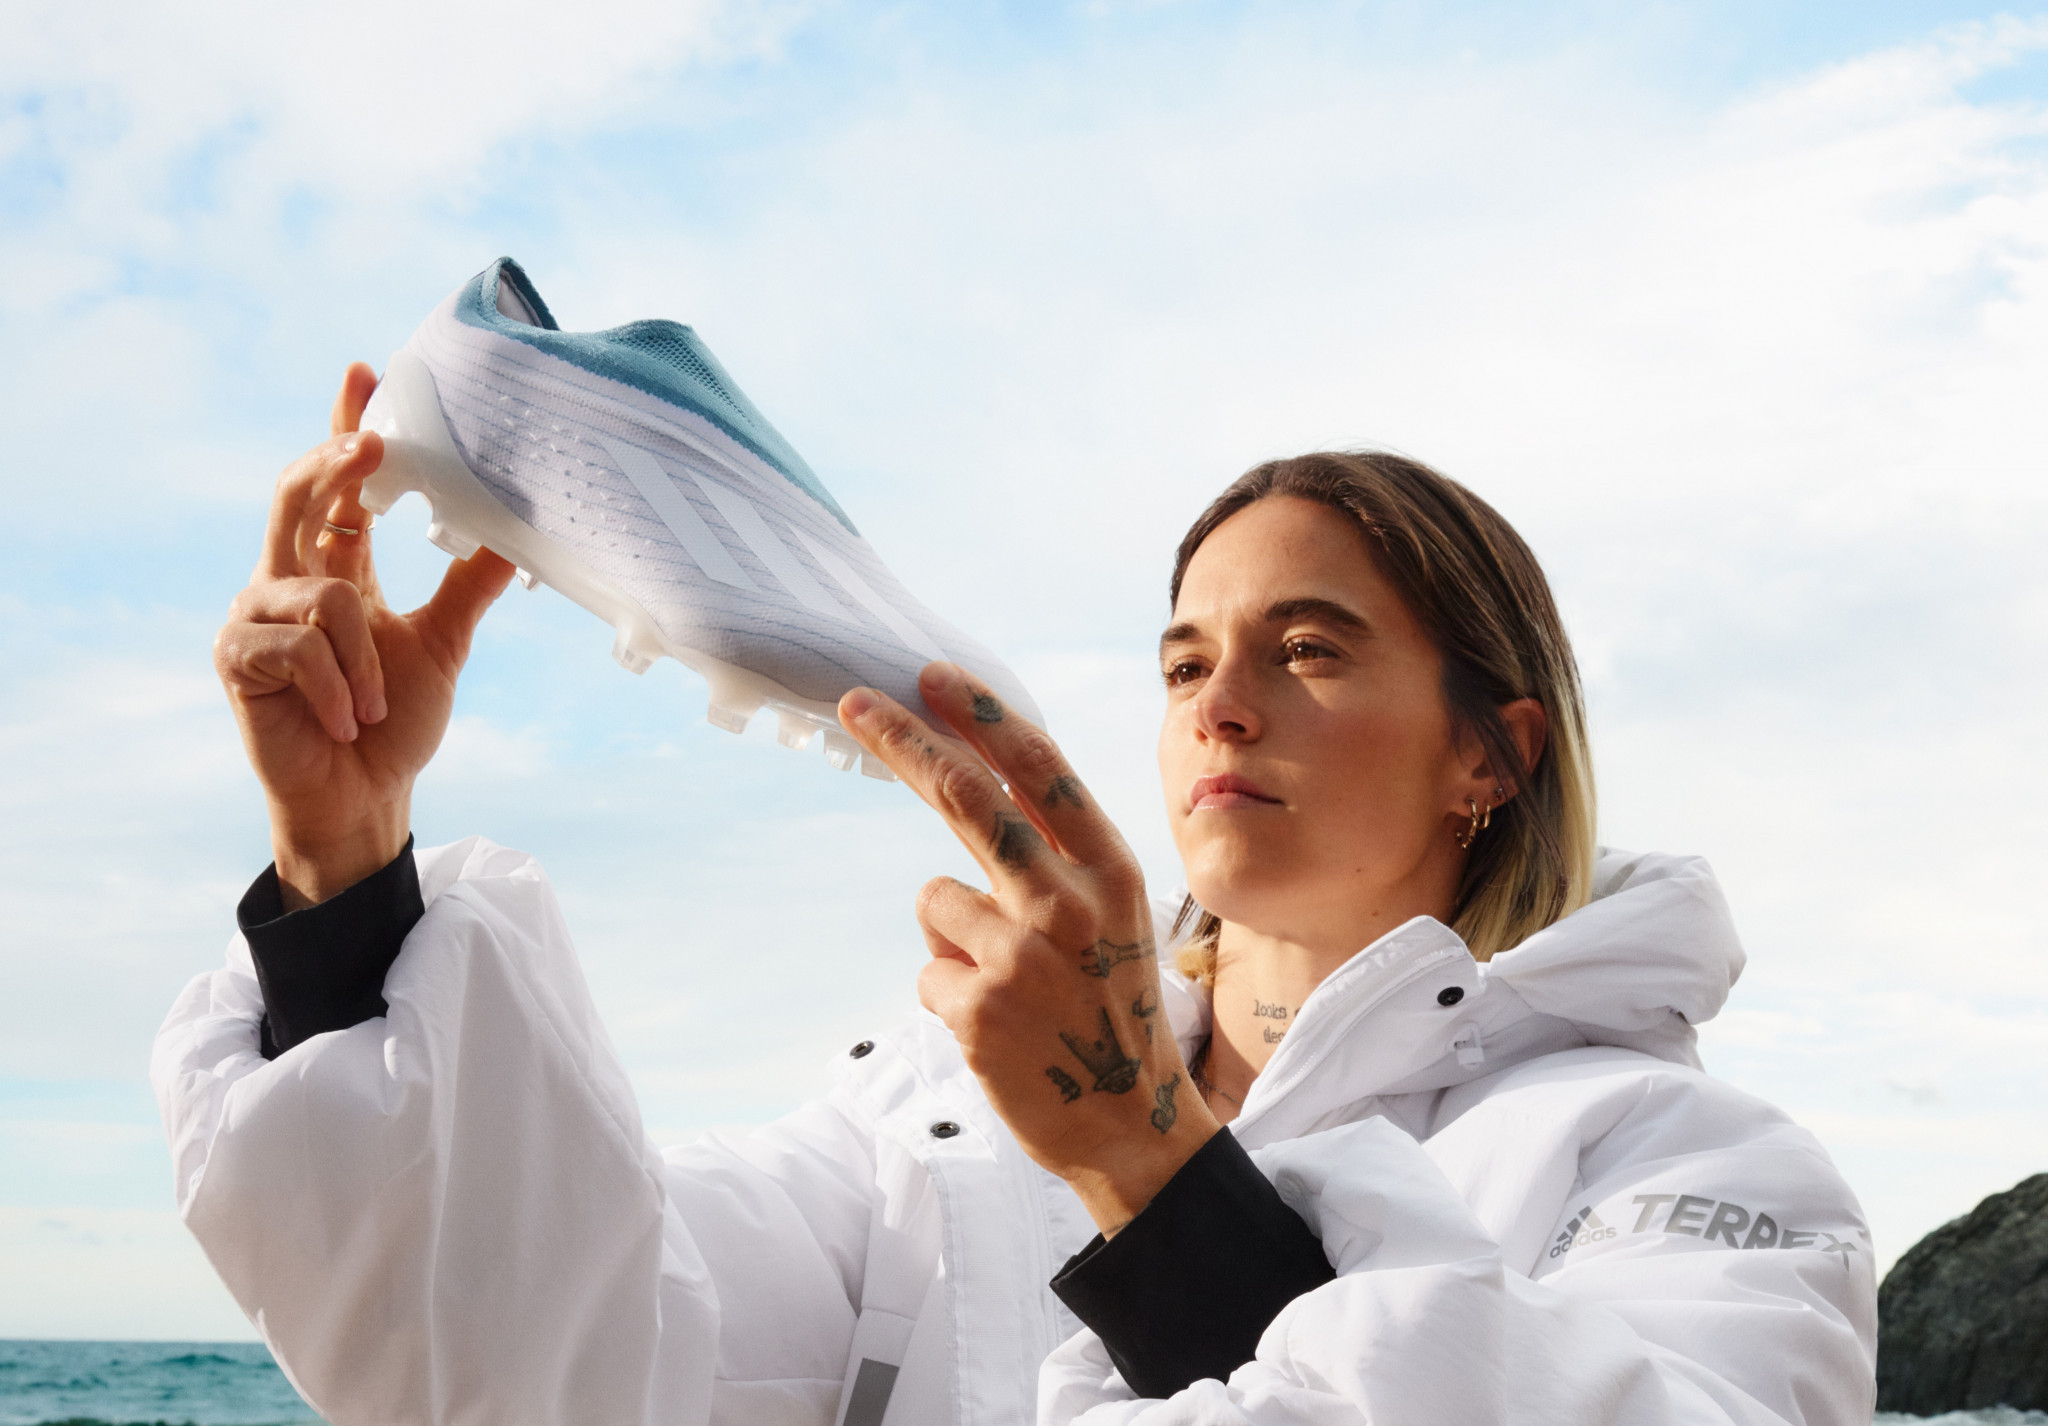 Adidas launches boots made of ocean plastic to prevent pollution